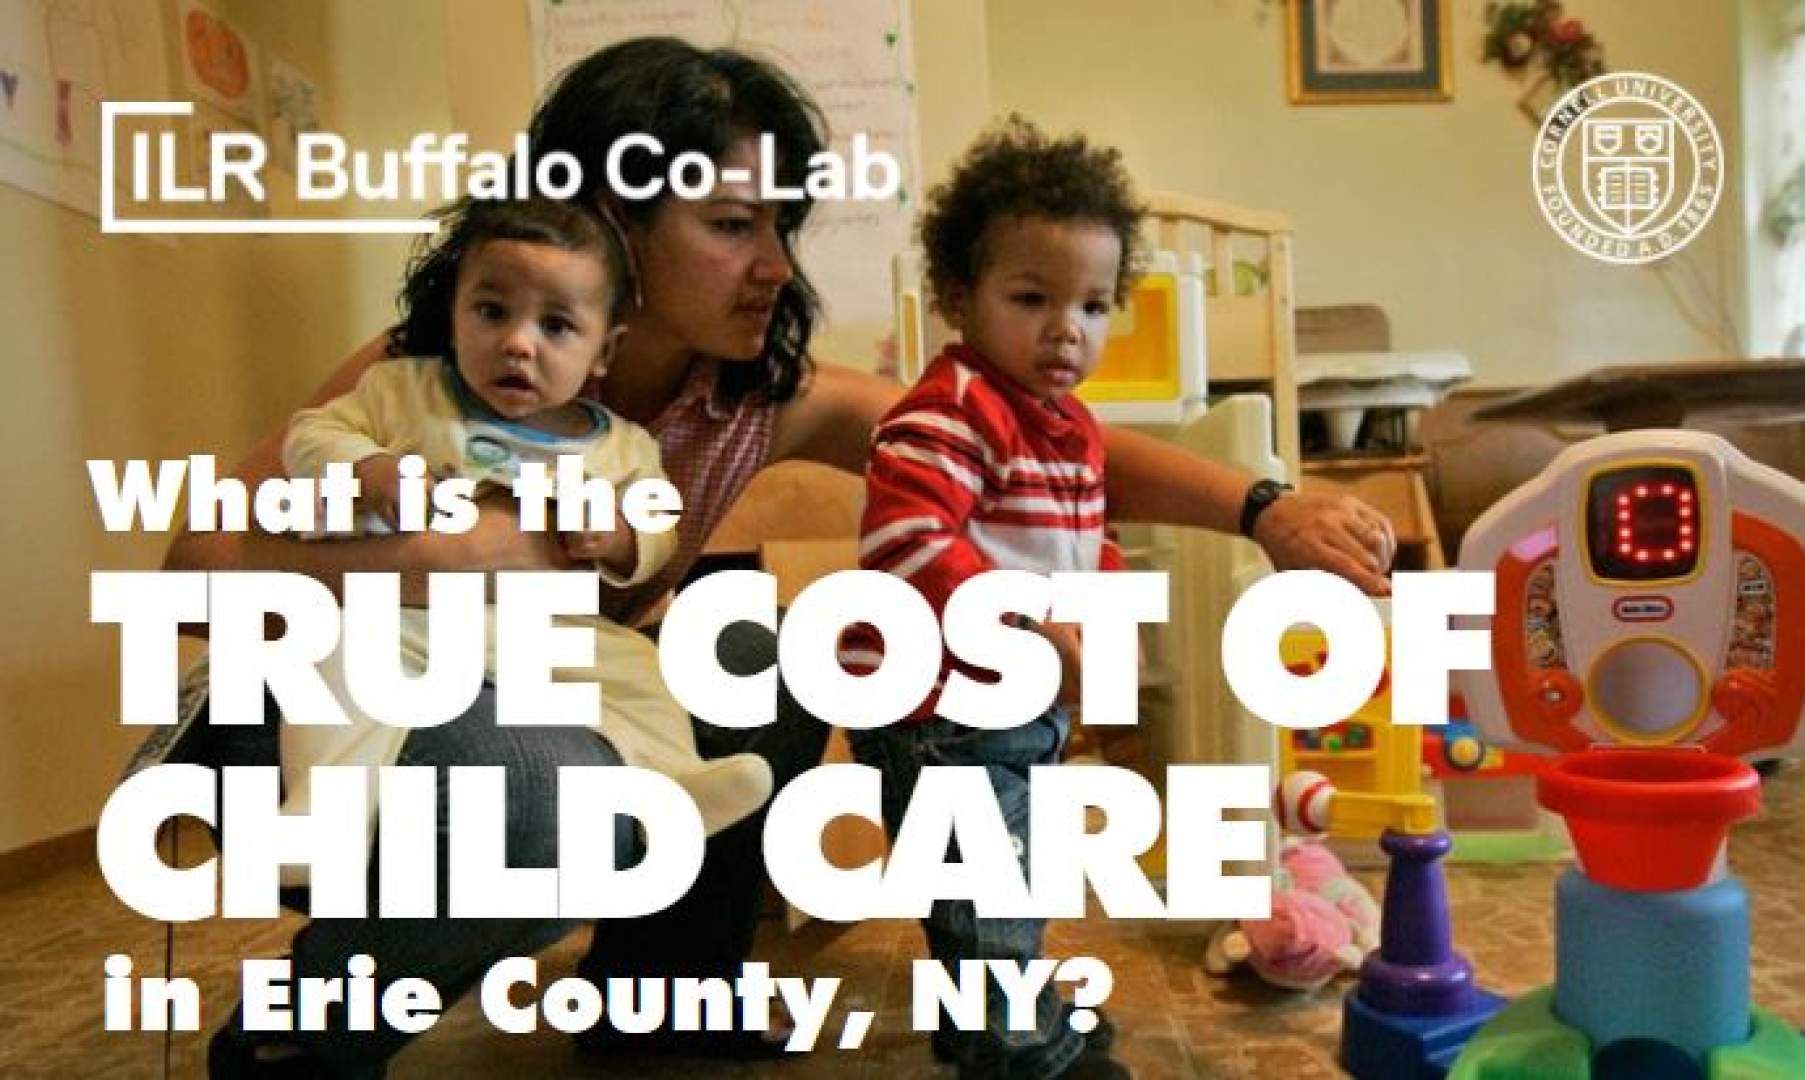 Public Presentation on the True Cost of Child Care in Erie County